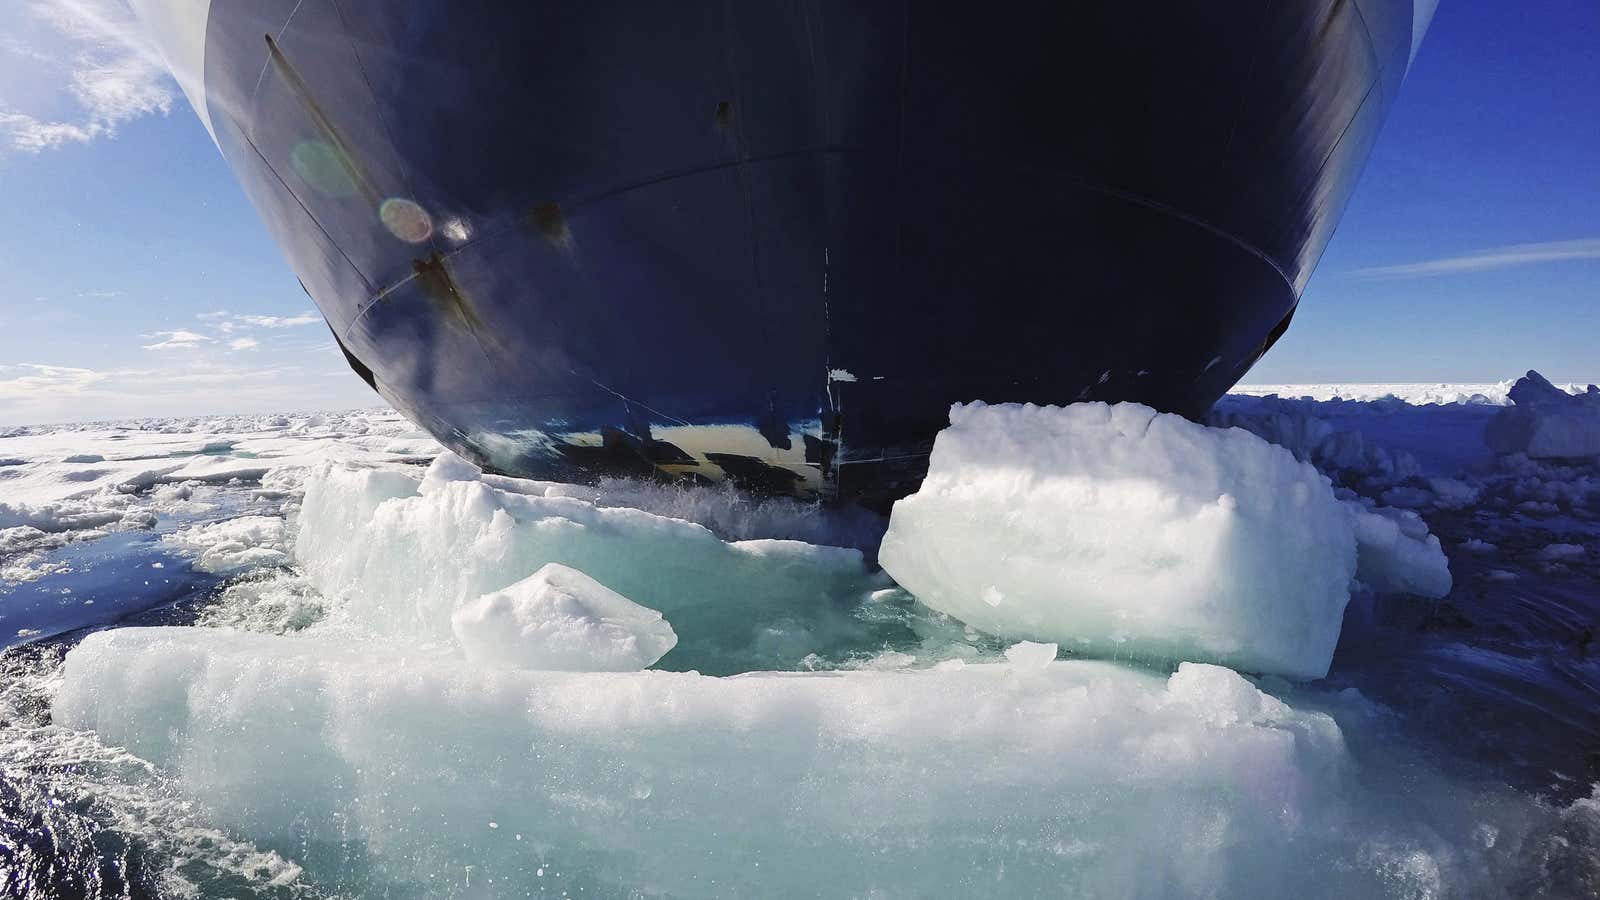 The Northwest Passage could dramatically shorten shipping time to Asia.